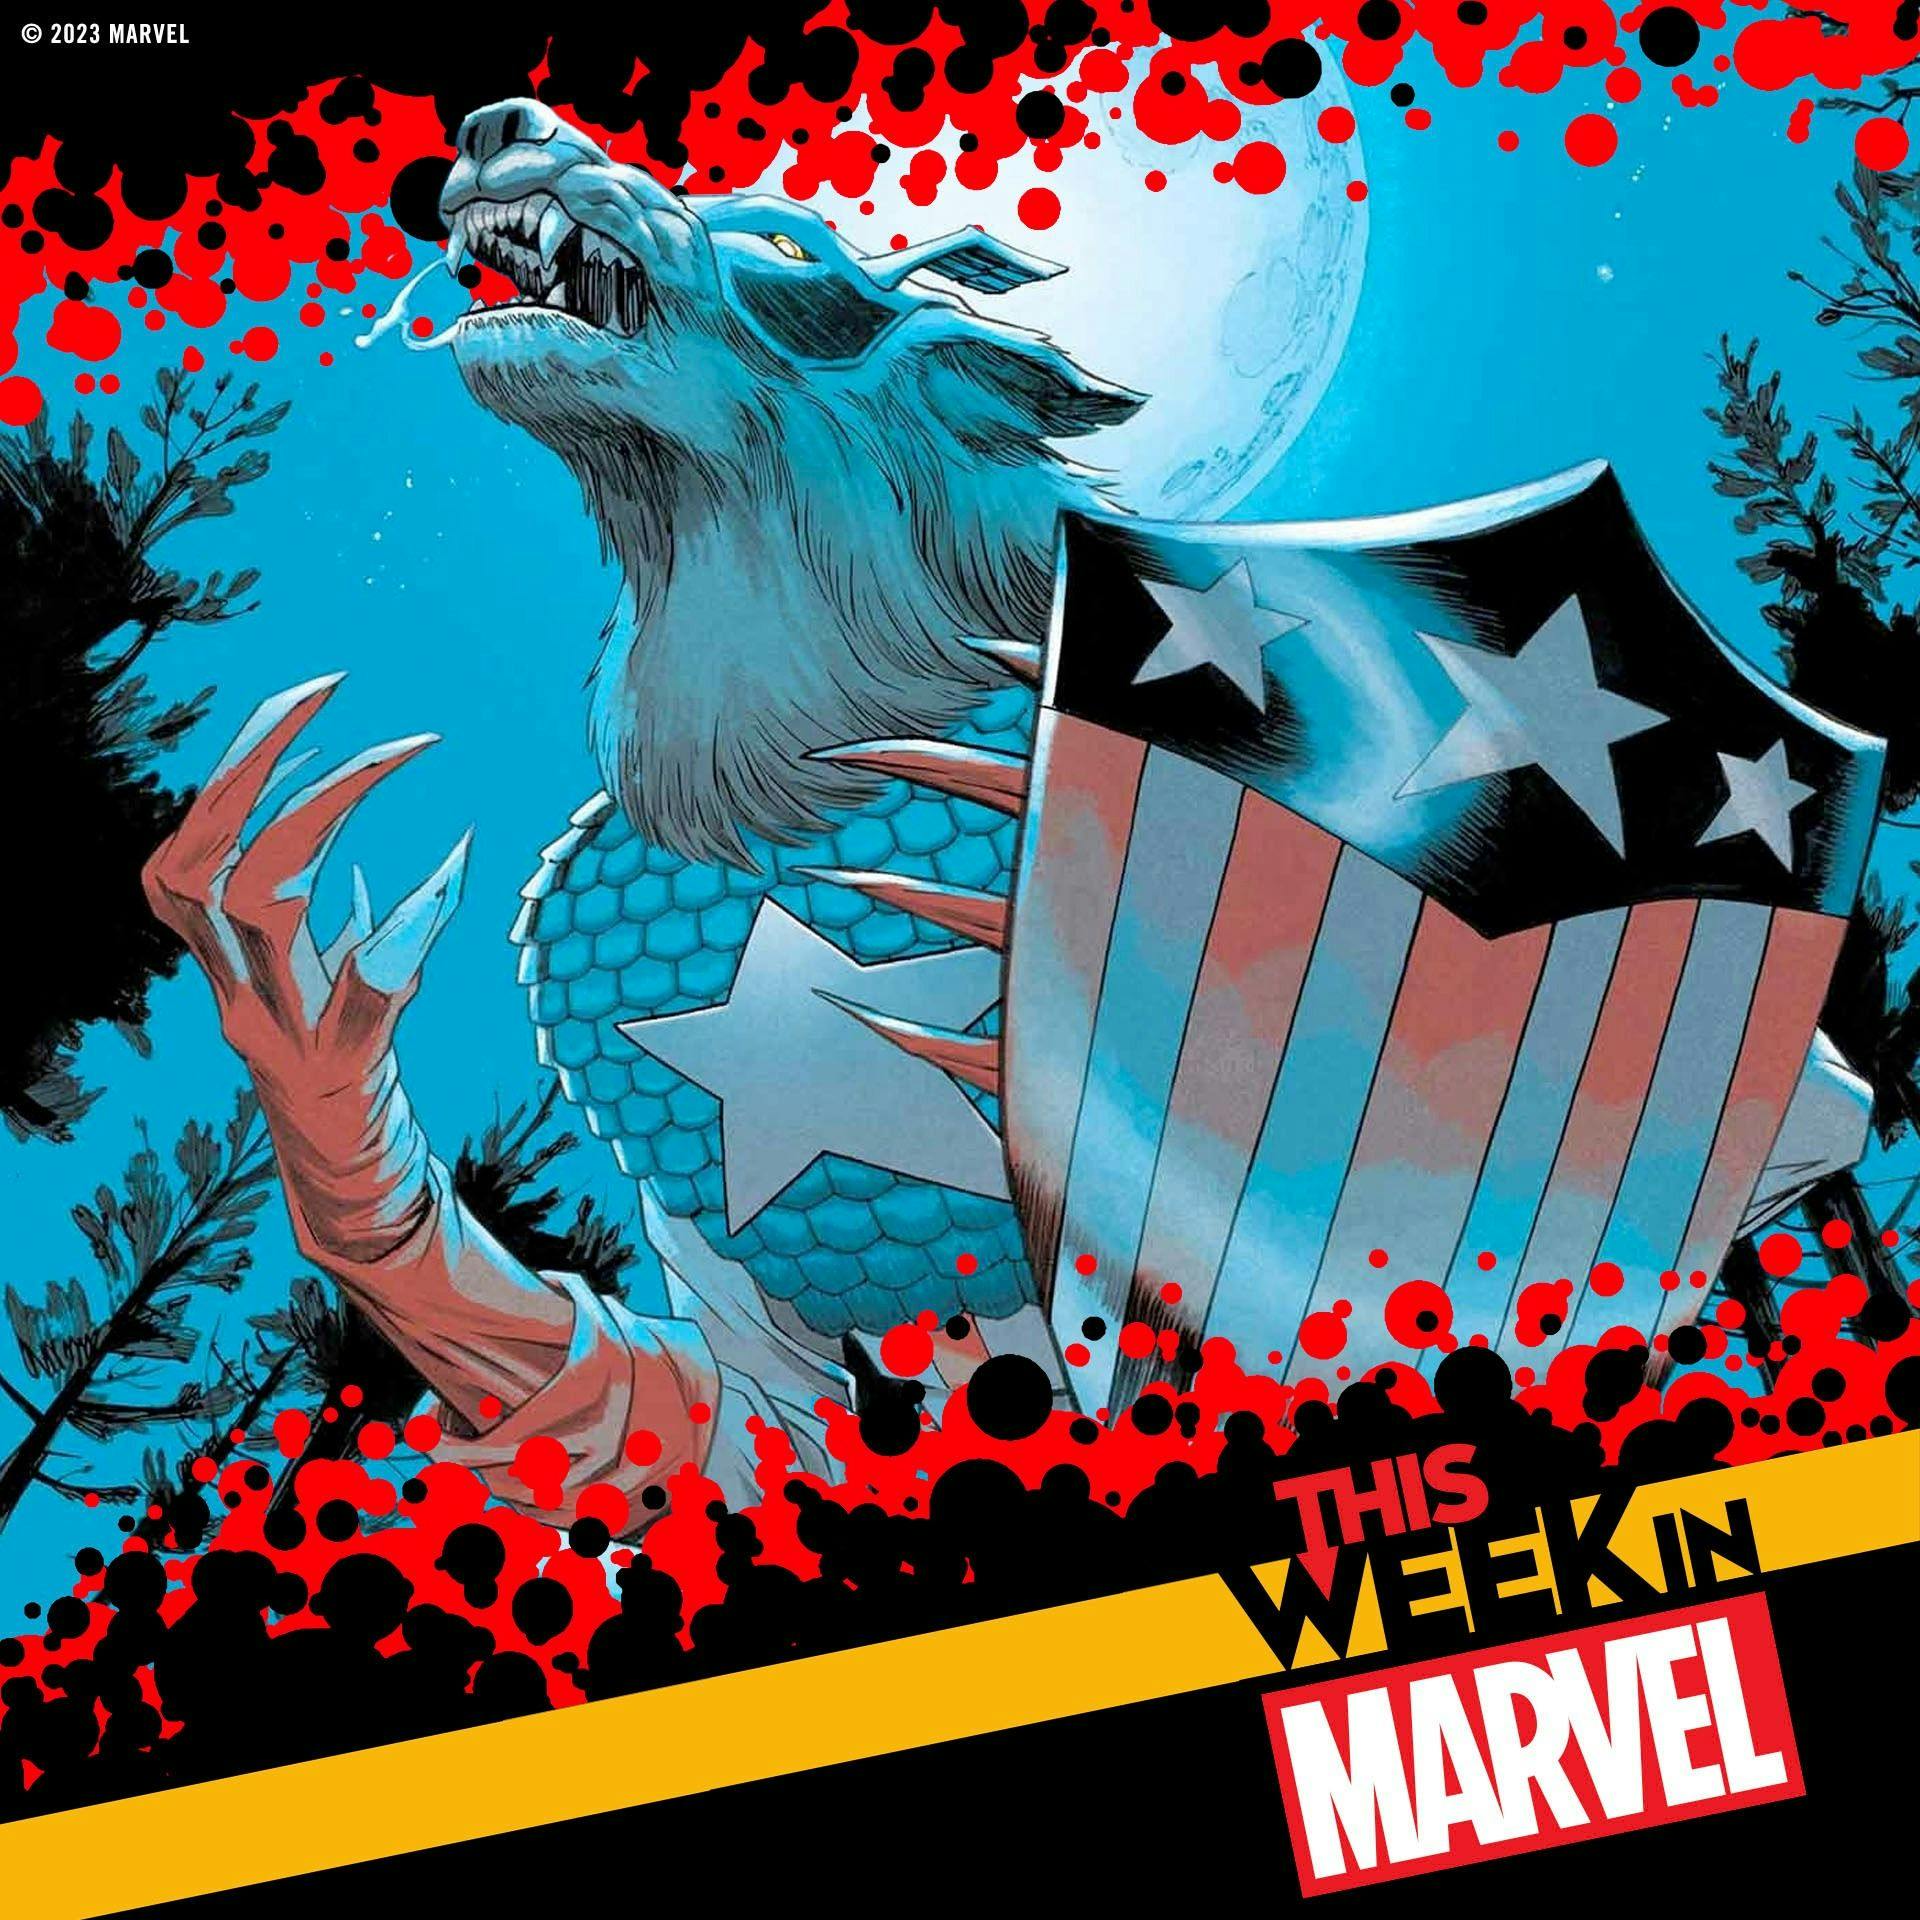 Marvel’s Spider-Man 2 is HERE, All the Major NYCC News, and more!